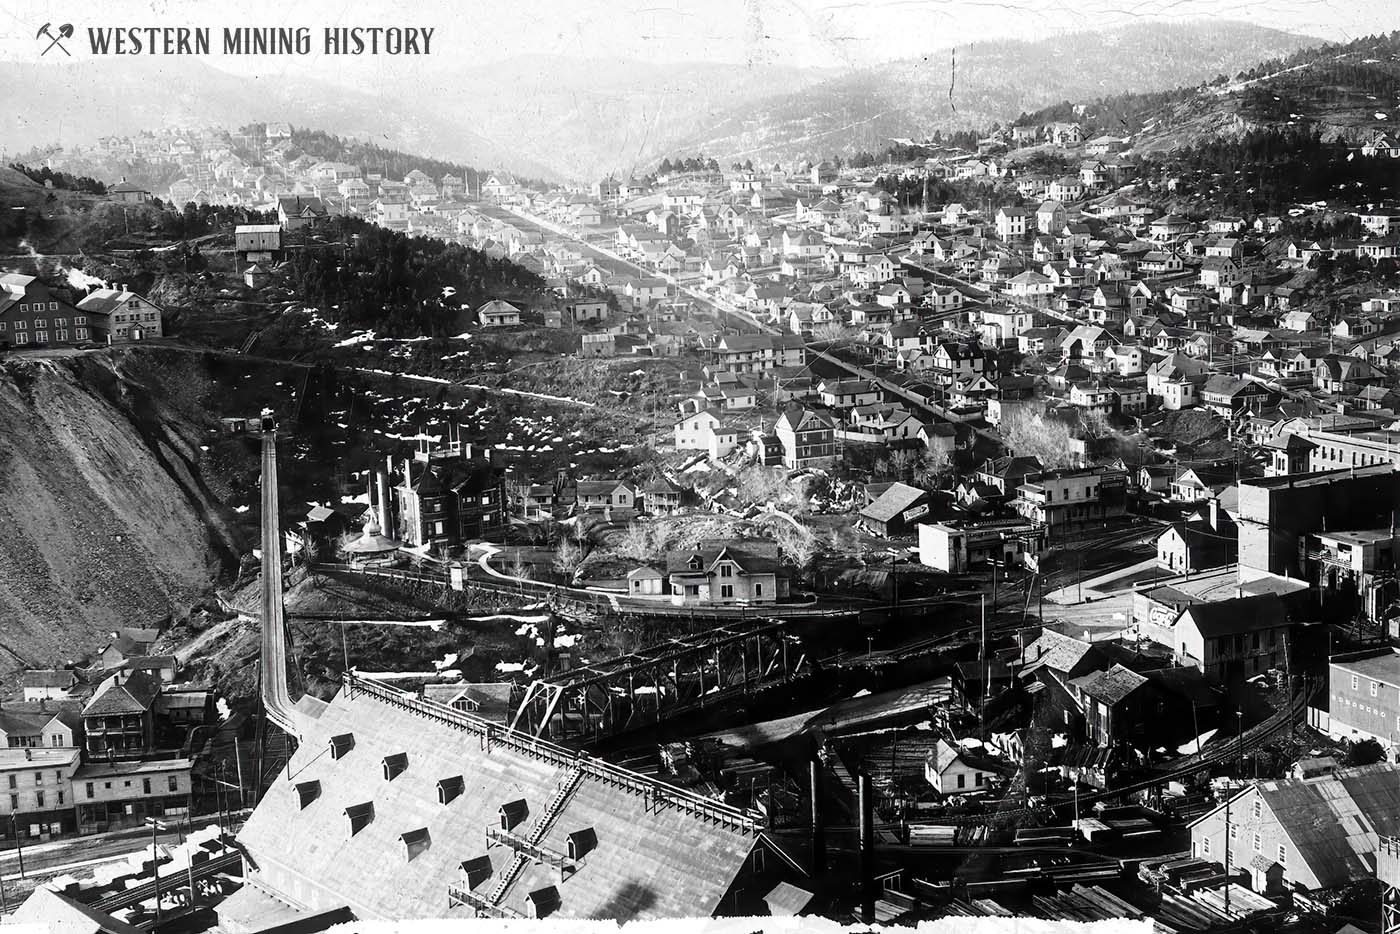 View of Lead, South Dakota from the Homestake Mine